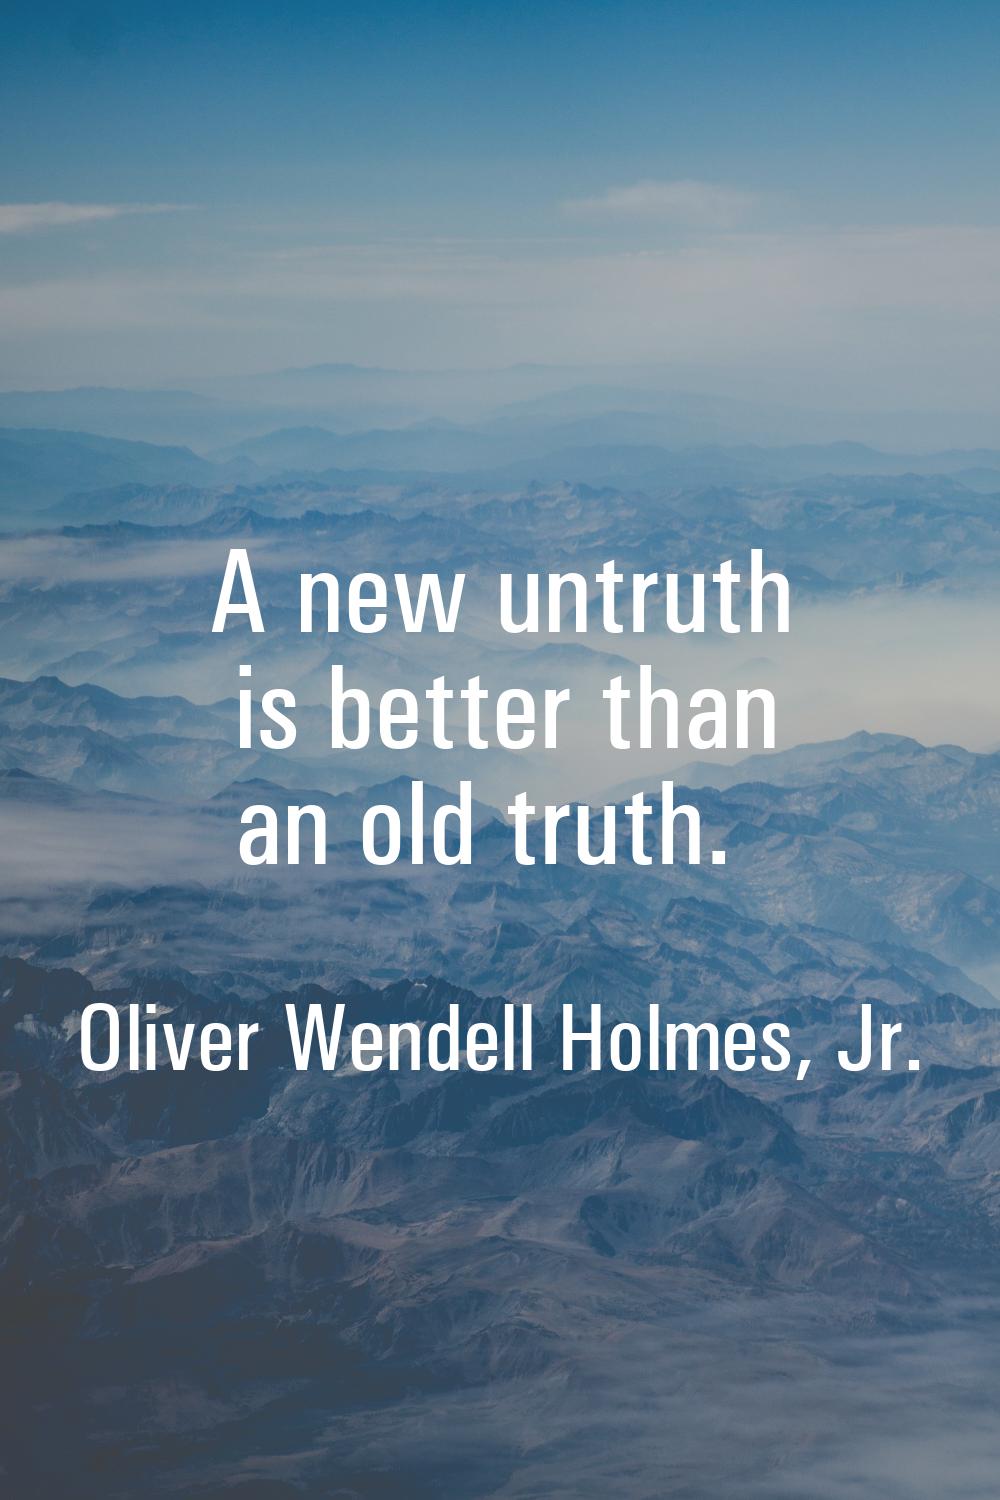 A new untruth is better than an old truth.